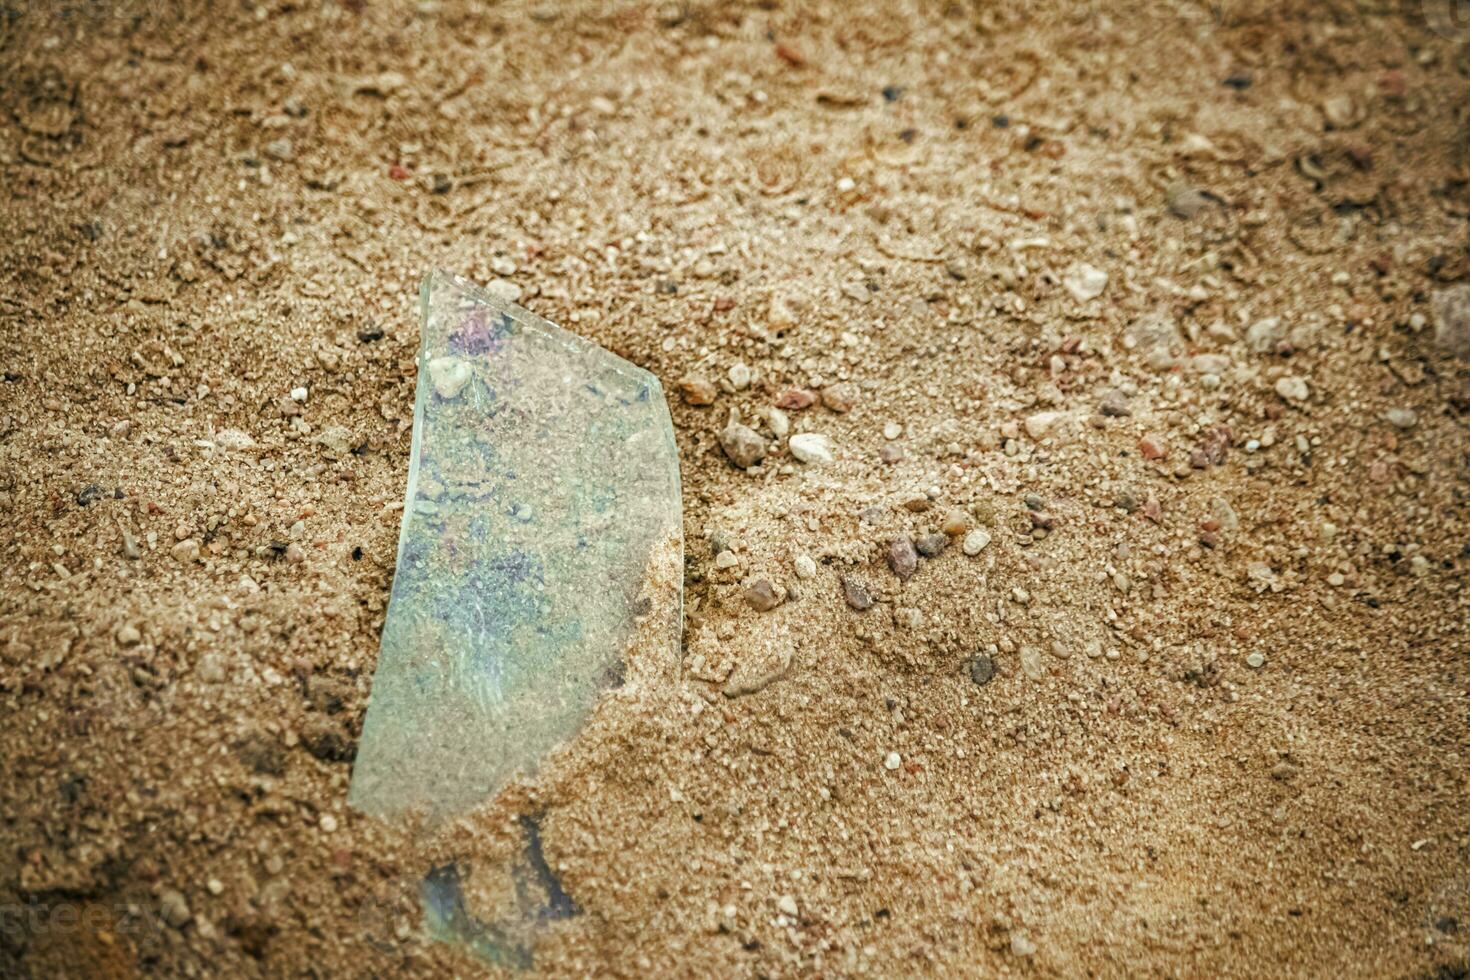 Transparent sharp glass shard from sticking out of the sand on the rural road with small pebbles photo